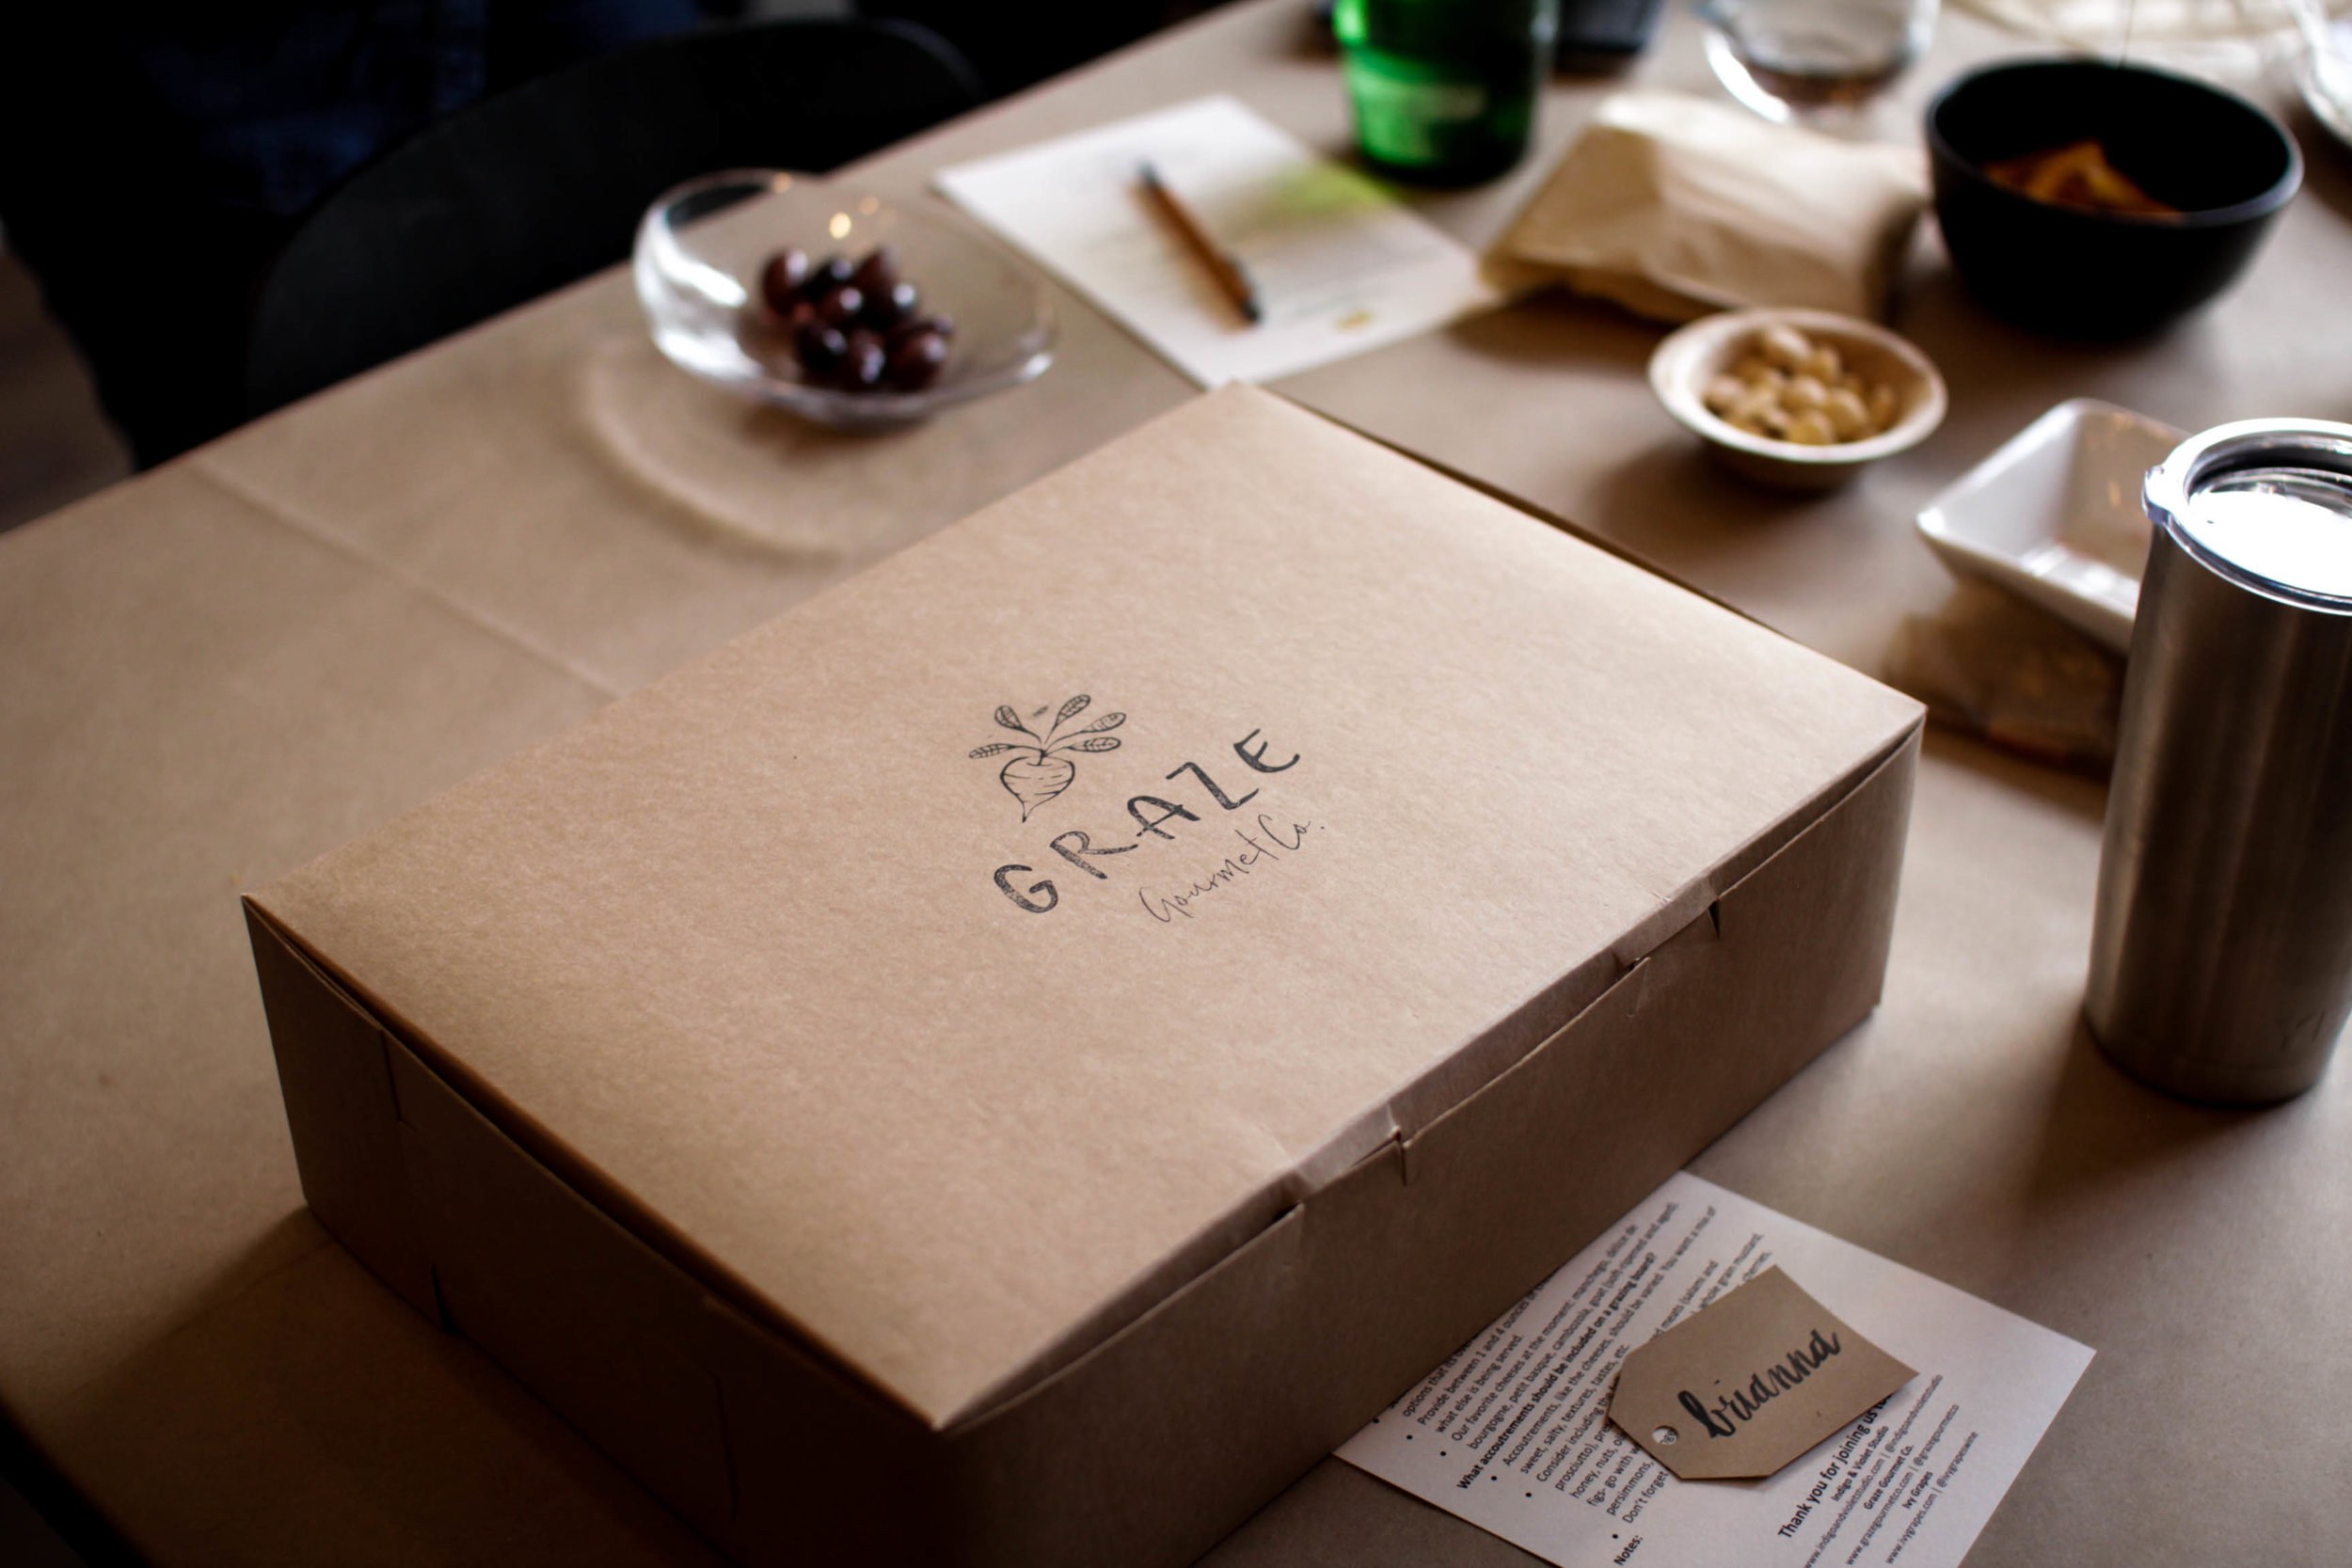 Graze Gourmet, a Chicago based charcuterie board delivery service